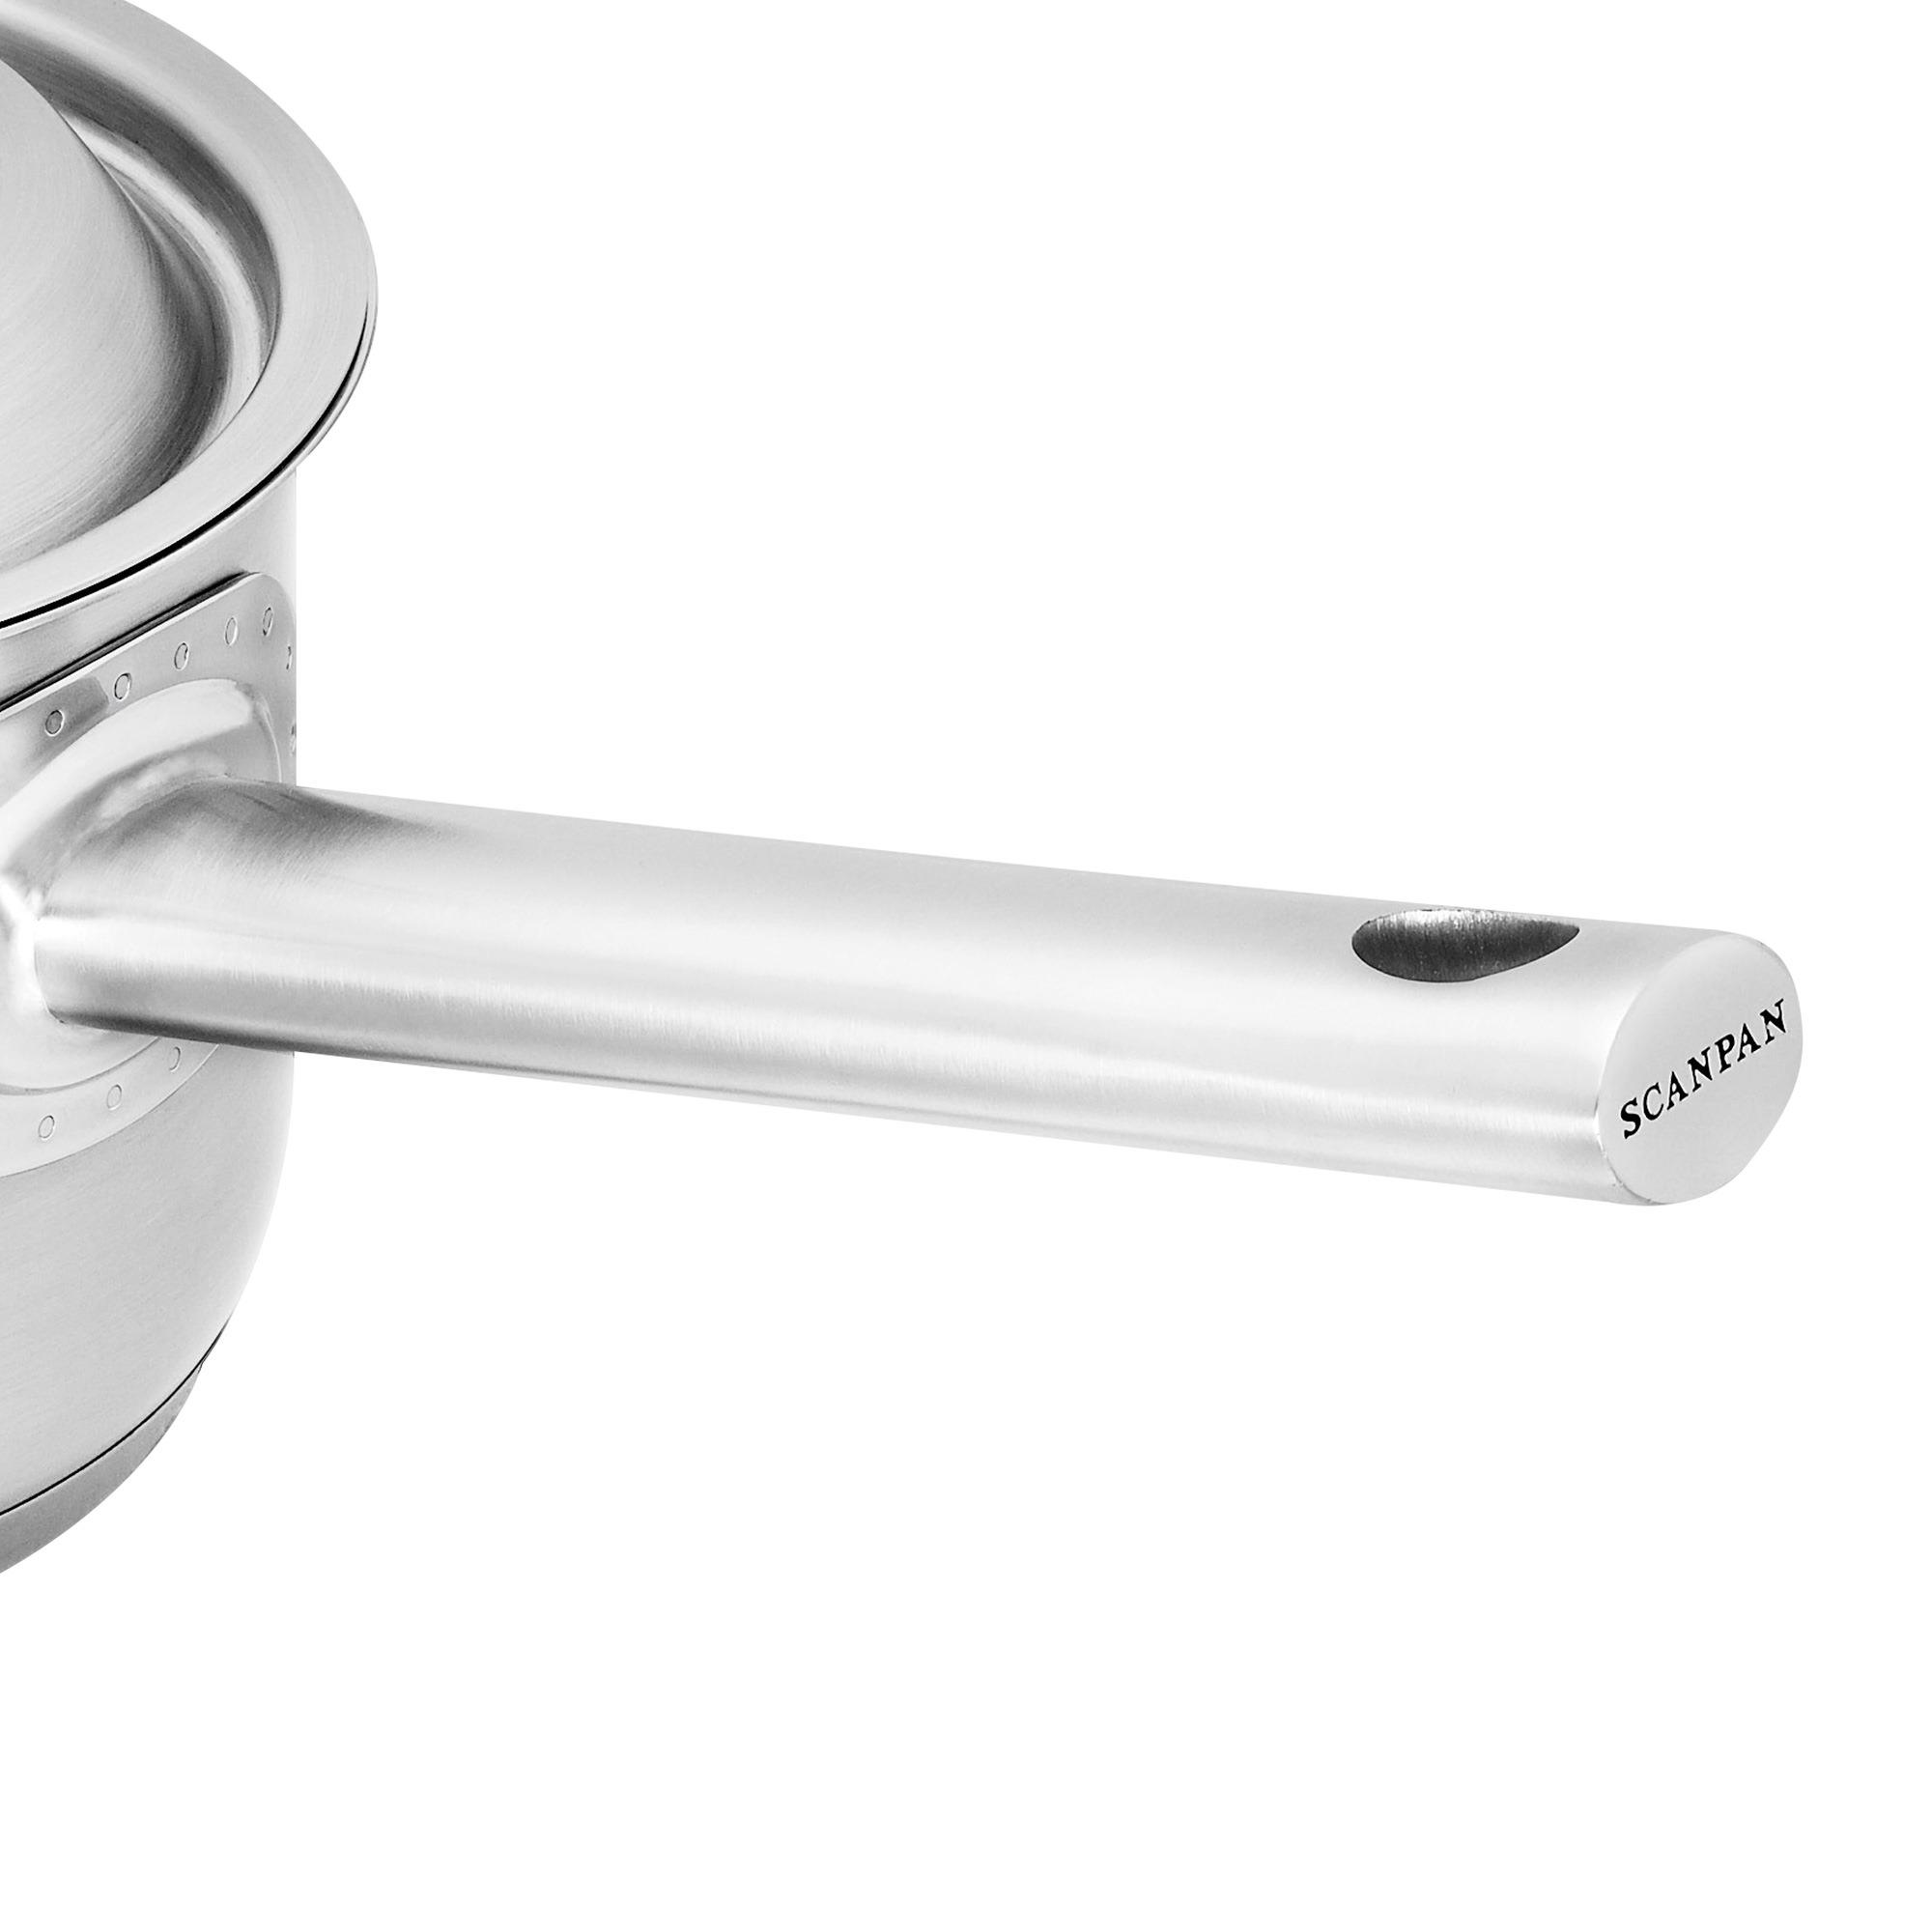 Scanpan Commercial Stainless Steel Covered Saucepan 14cm - 1.2L Image 3